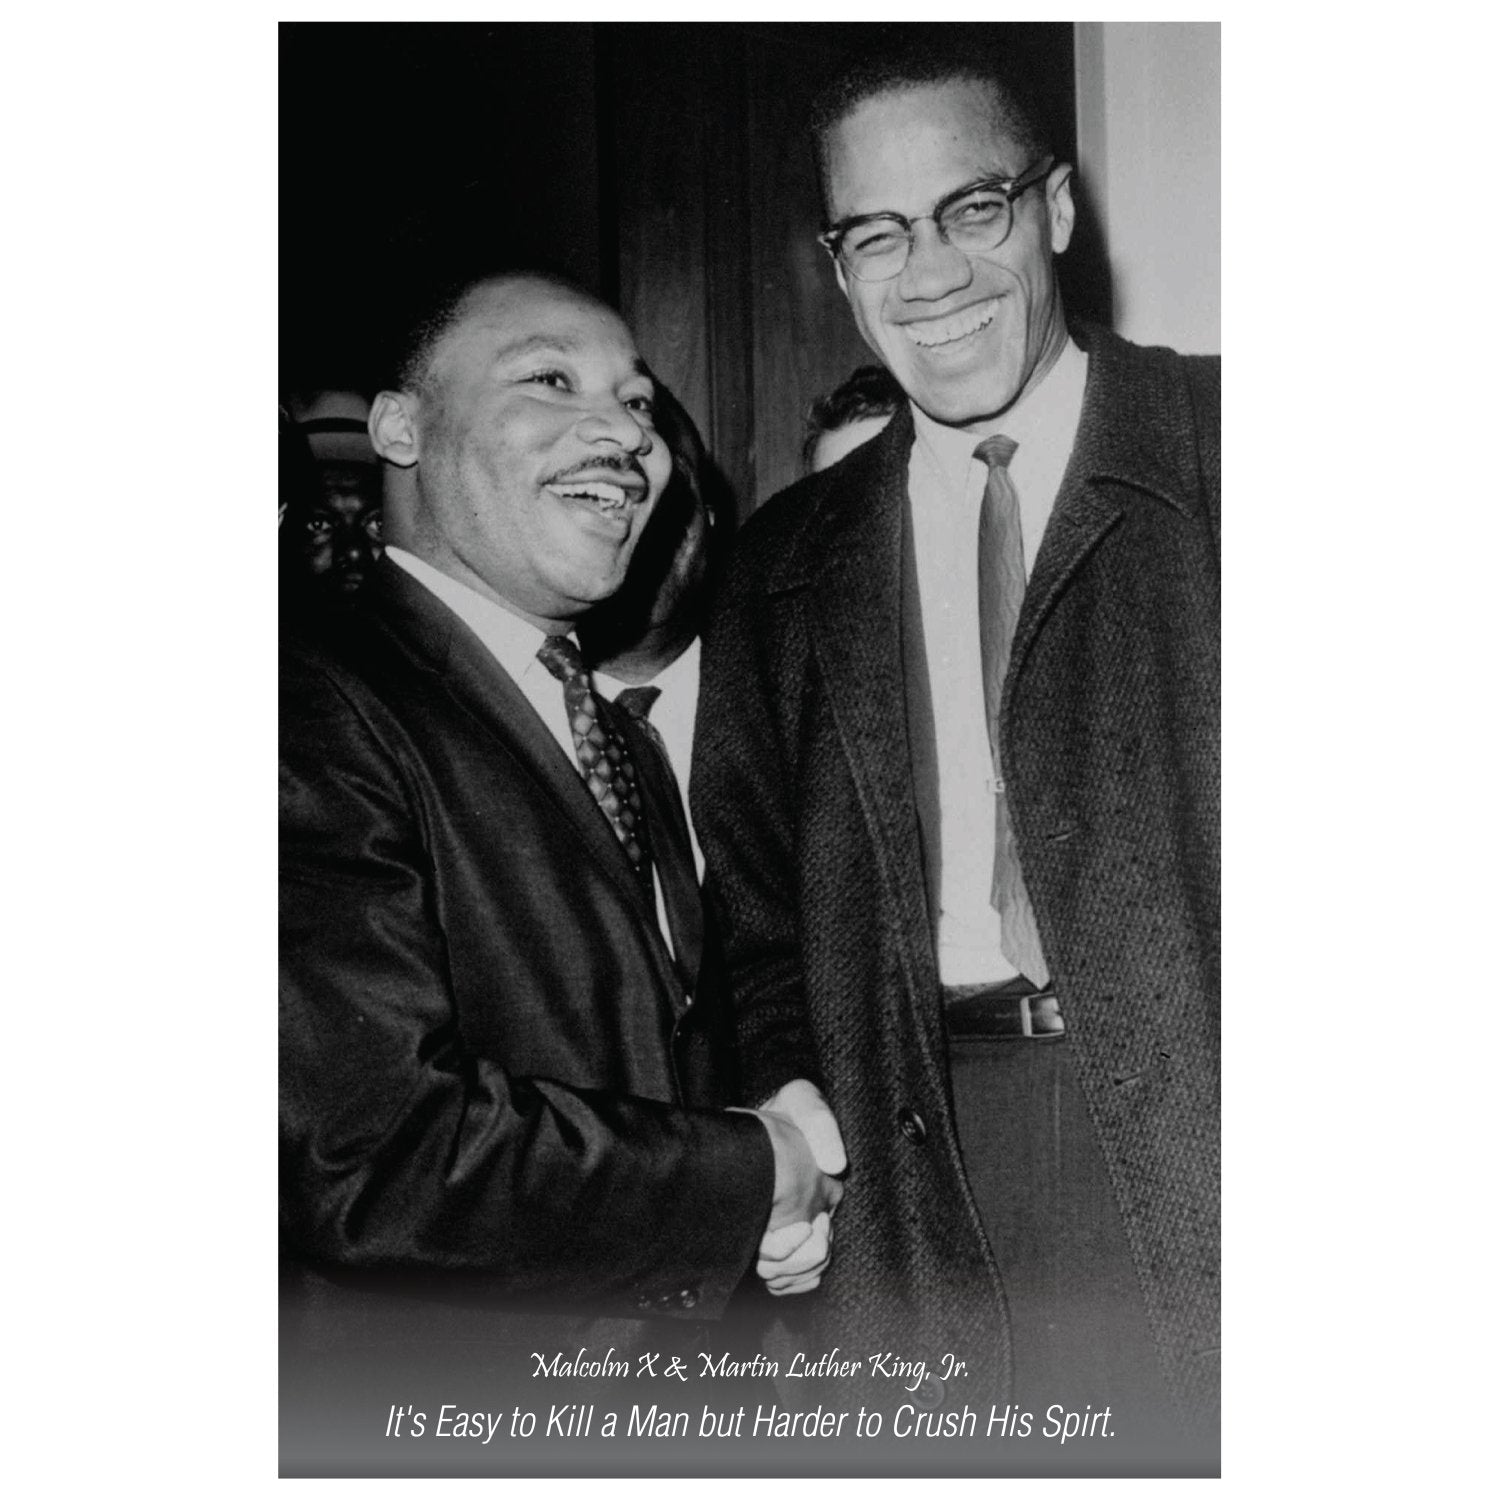 1 of 2: Malcolm X and Martin Luther King Jr: The Meeting by Sankofa Designs